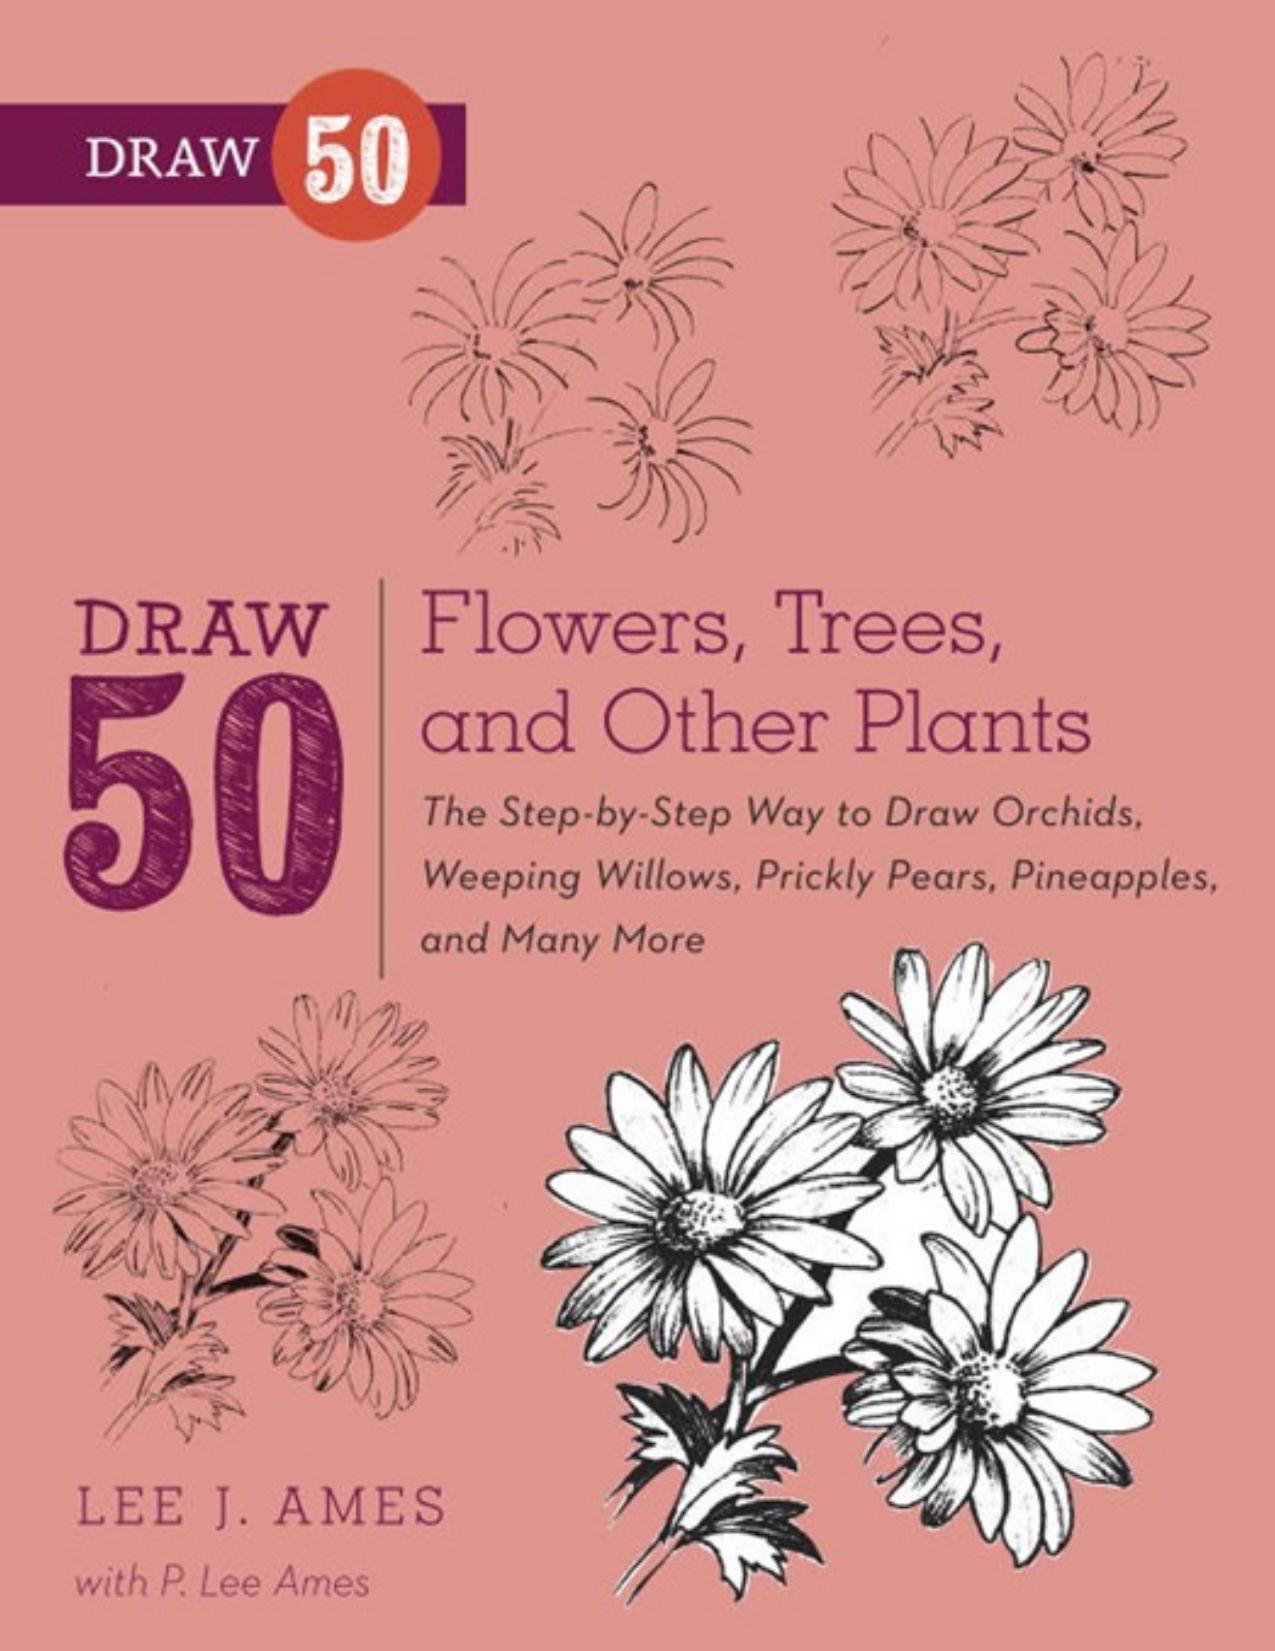 Draw 50 Flowers, Trees, and Other Plants: The Step-by-Step Way to Draw Orchids, Weeping Willows, Prickly Pears, Pineapples, and Many More... - PDFDrive.com